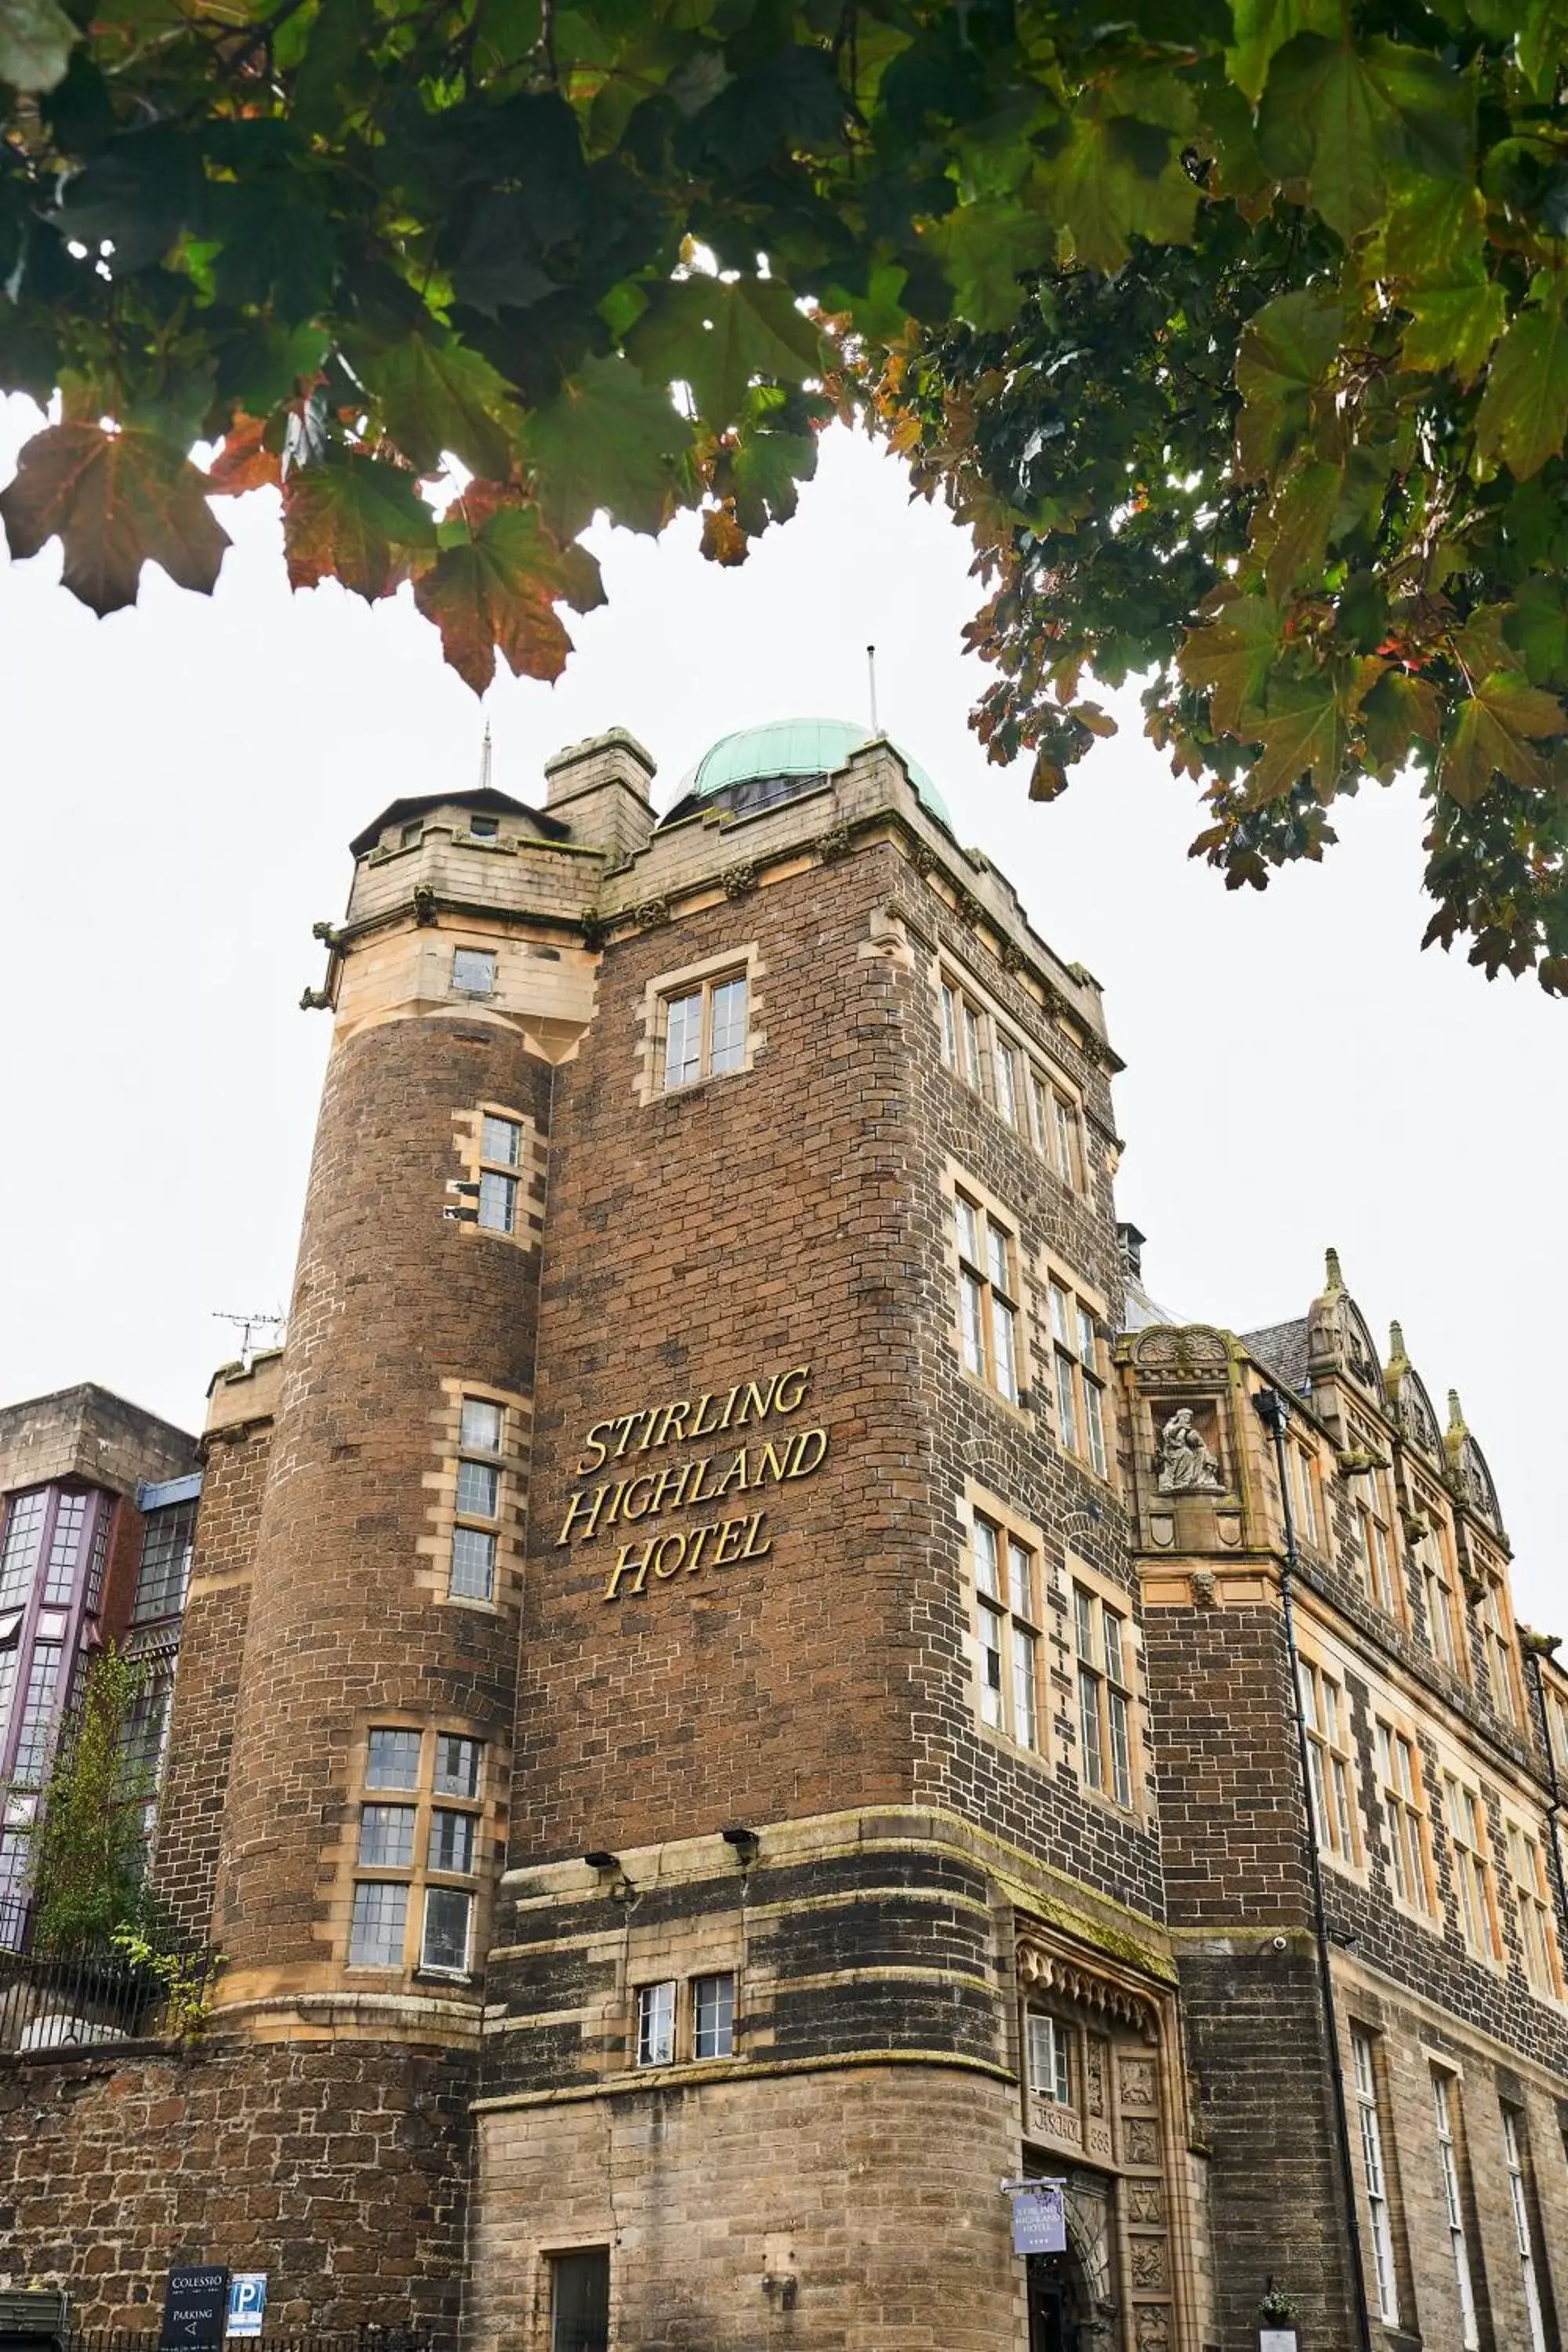 Property Building in Stirling Highland Hotel- Part of the Cairn Collection